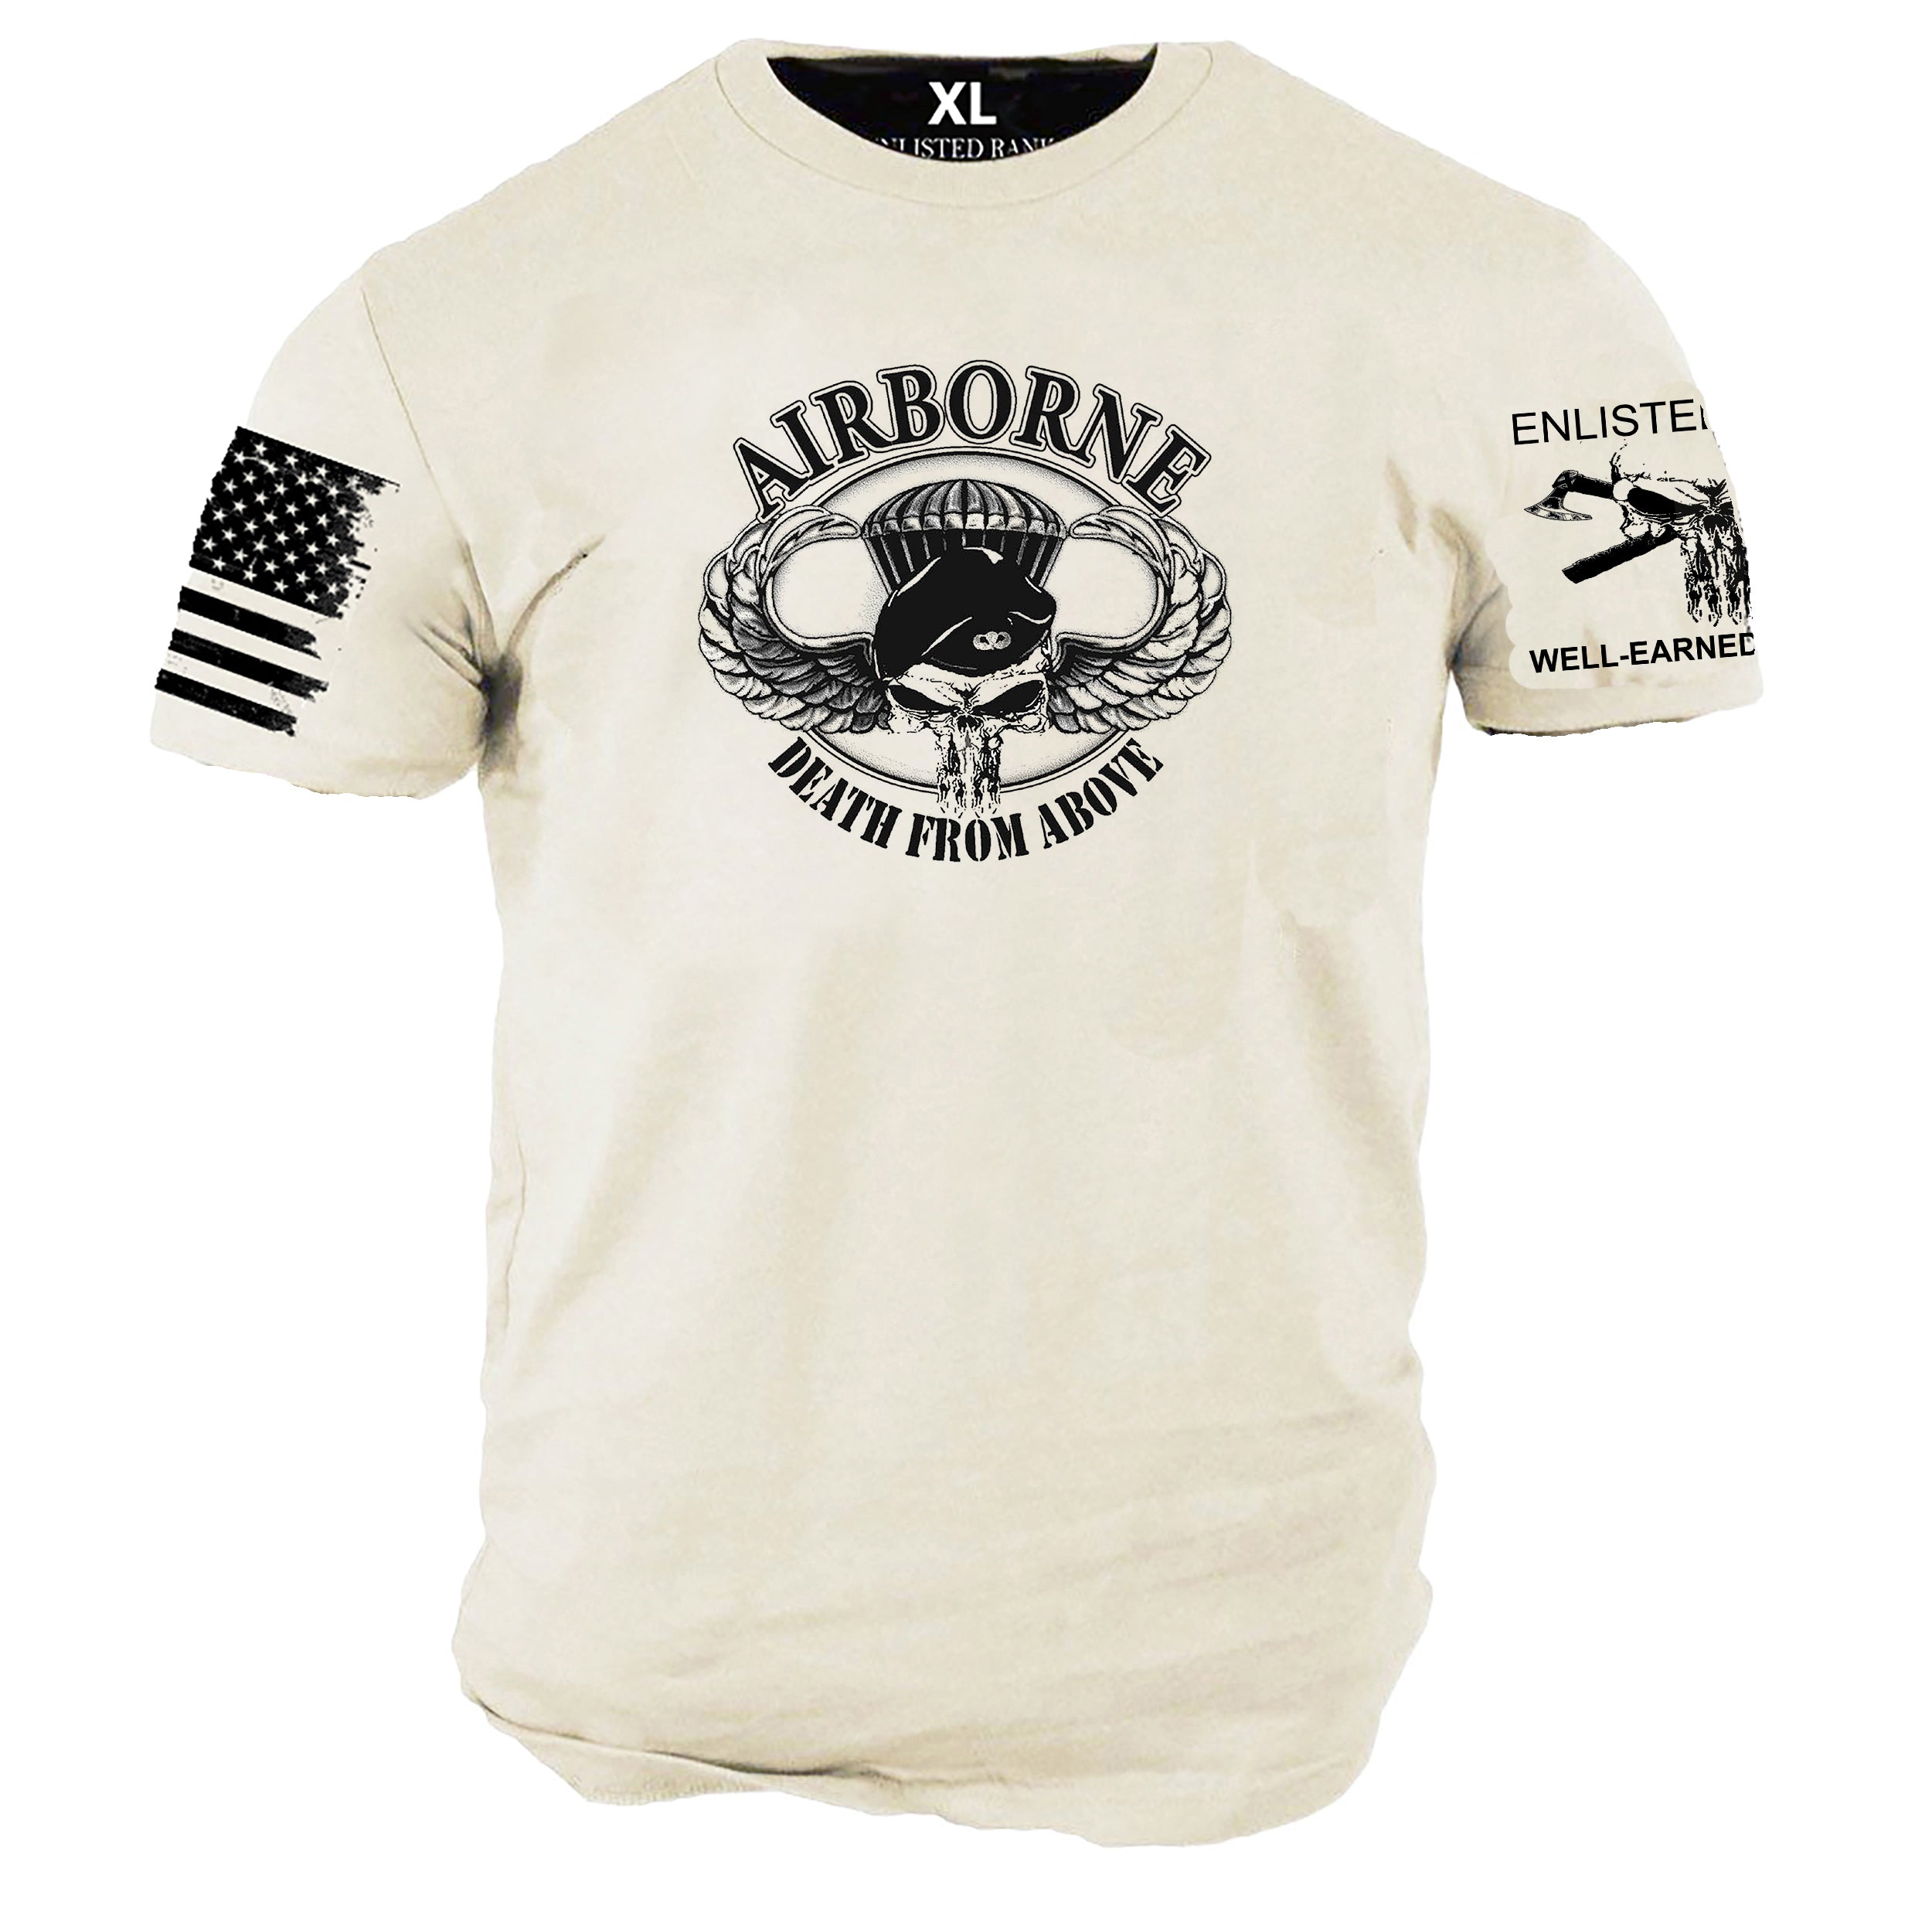 AIRBORNE, Death From Above, Enlisted Ranks graphic t-shirt, In Stock